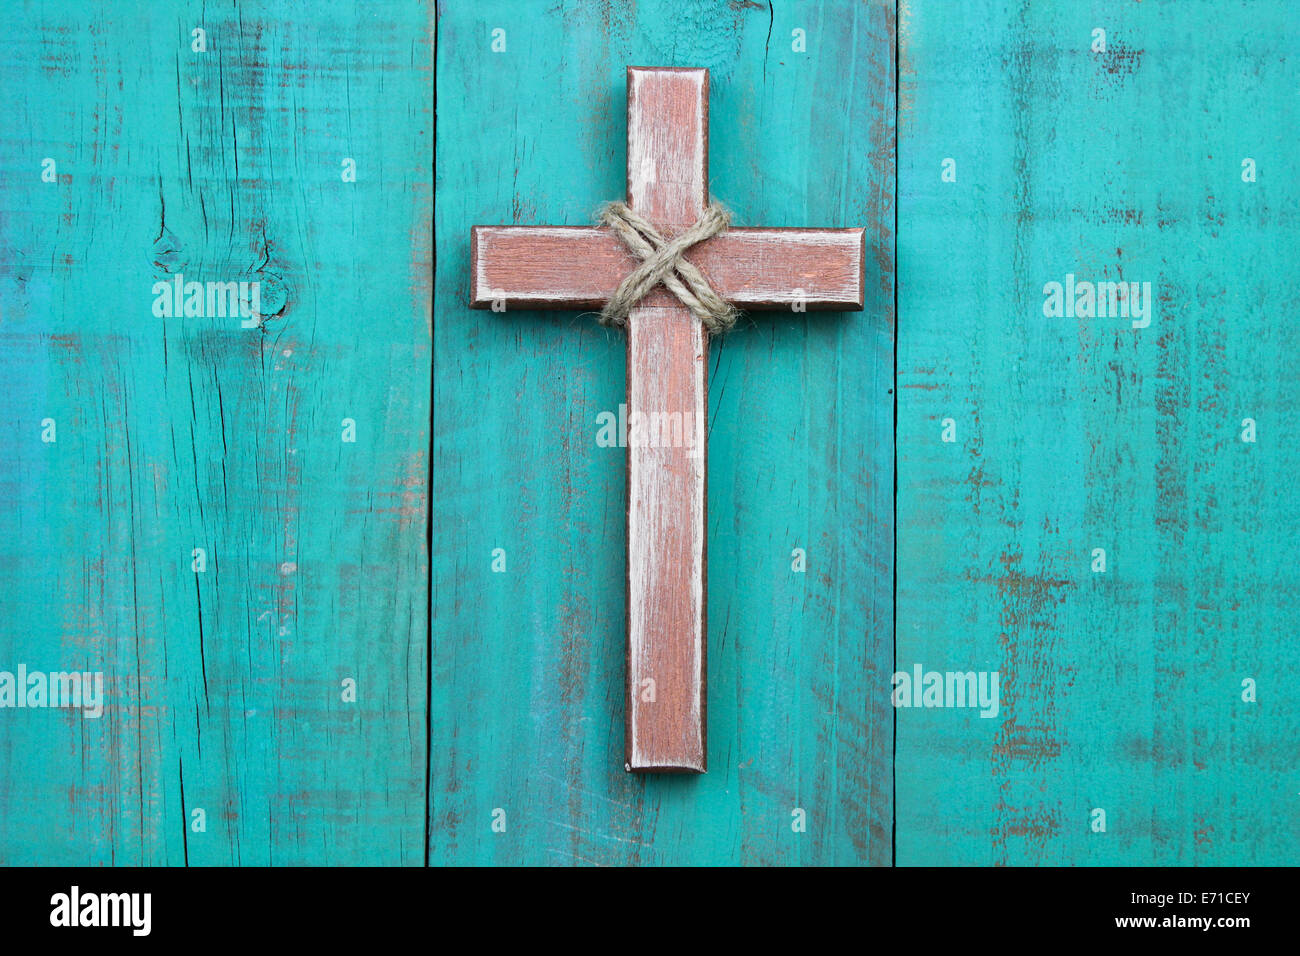 Rugged wooden cross hanging on antique teal blue rustic wood background Stock Photo